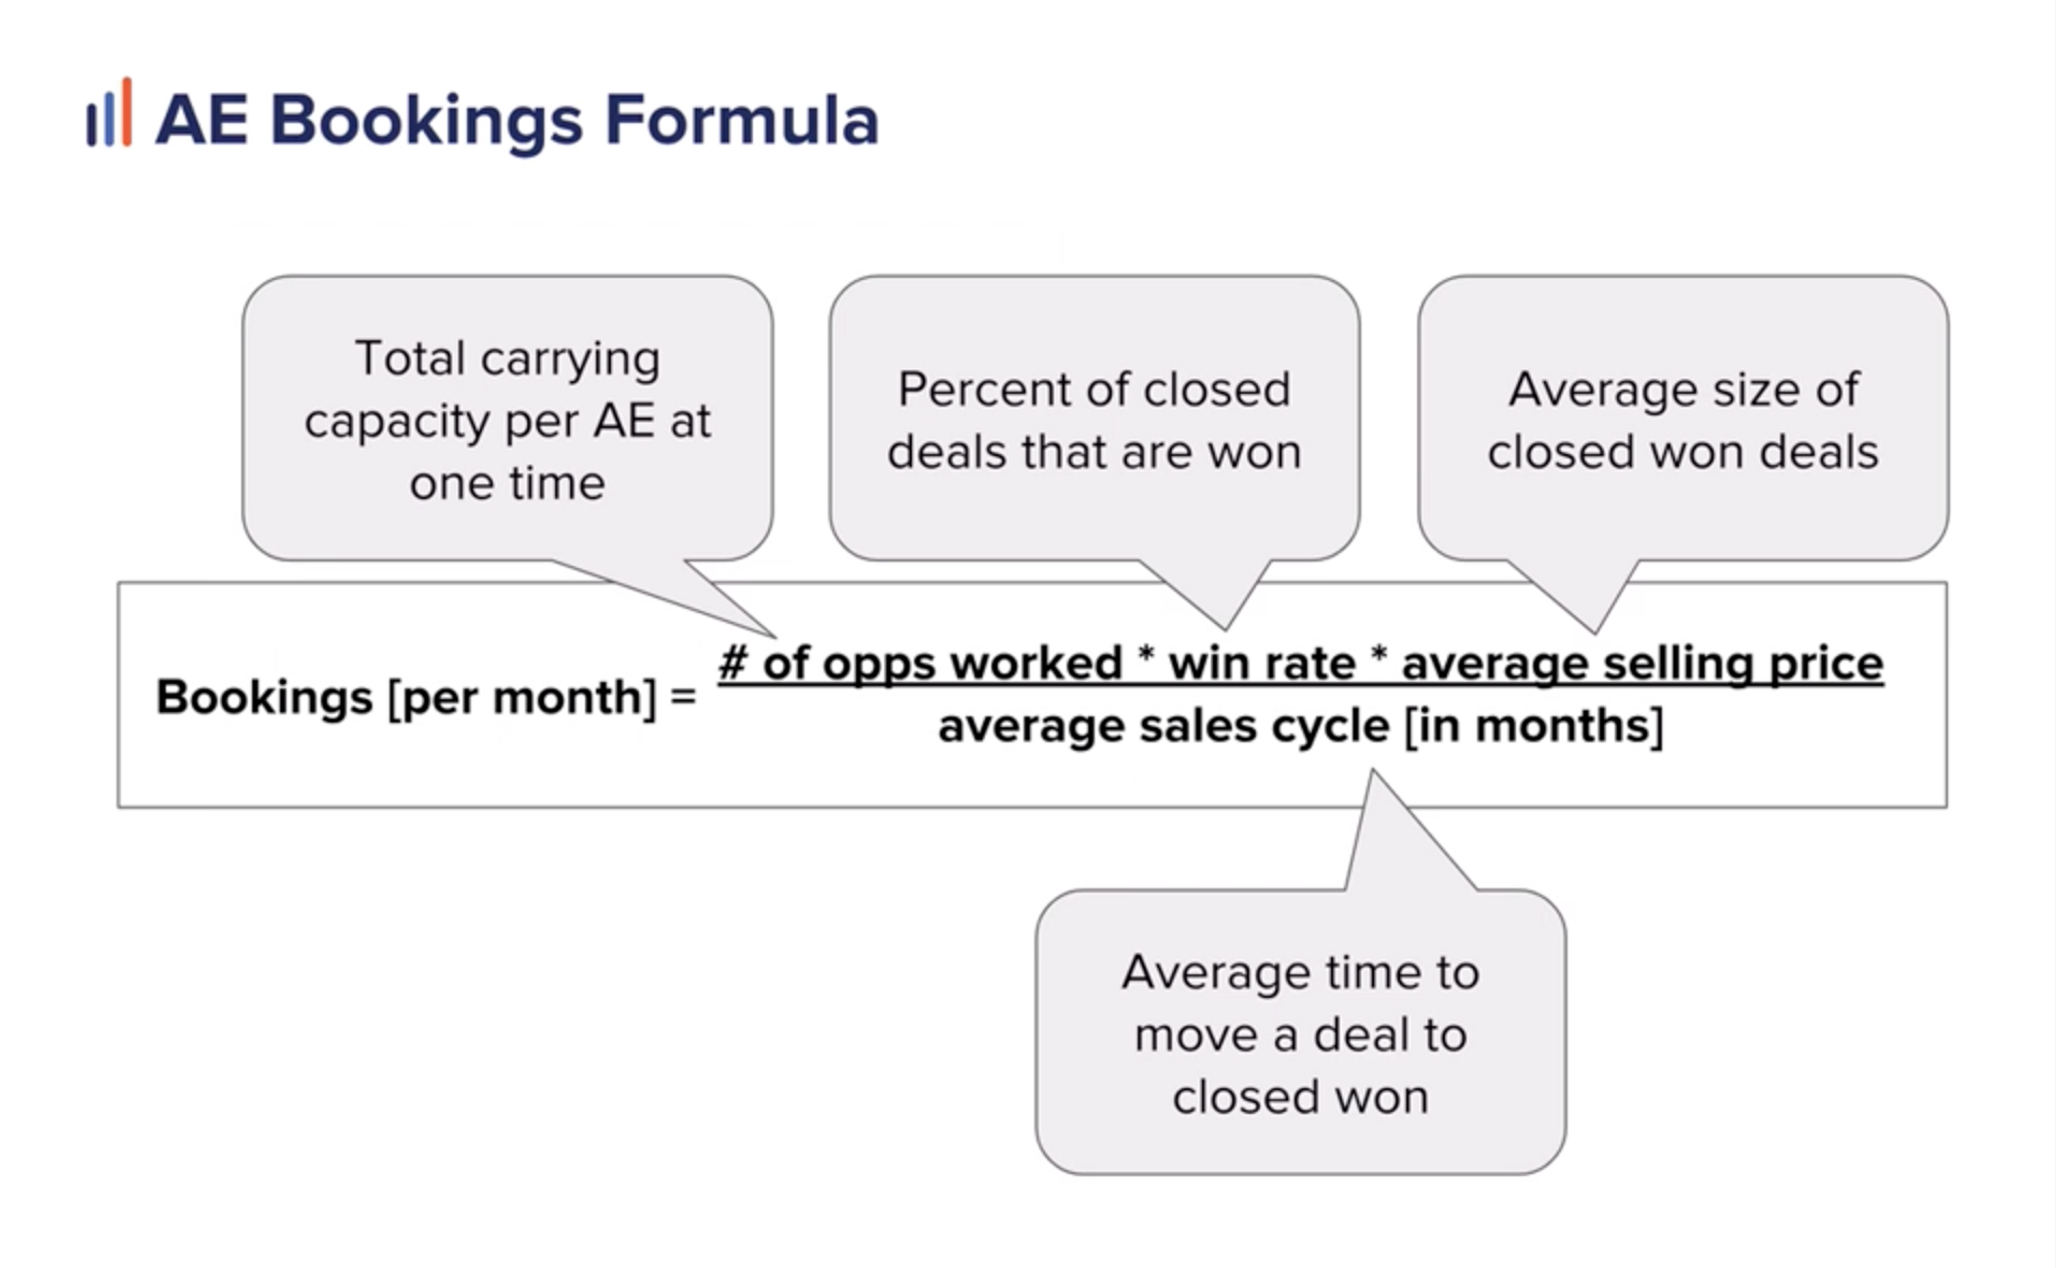 Formula to calculate monthly bookings for AEs